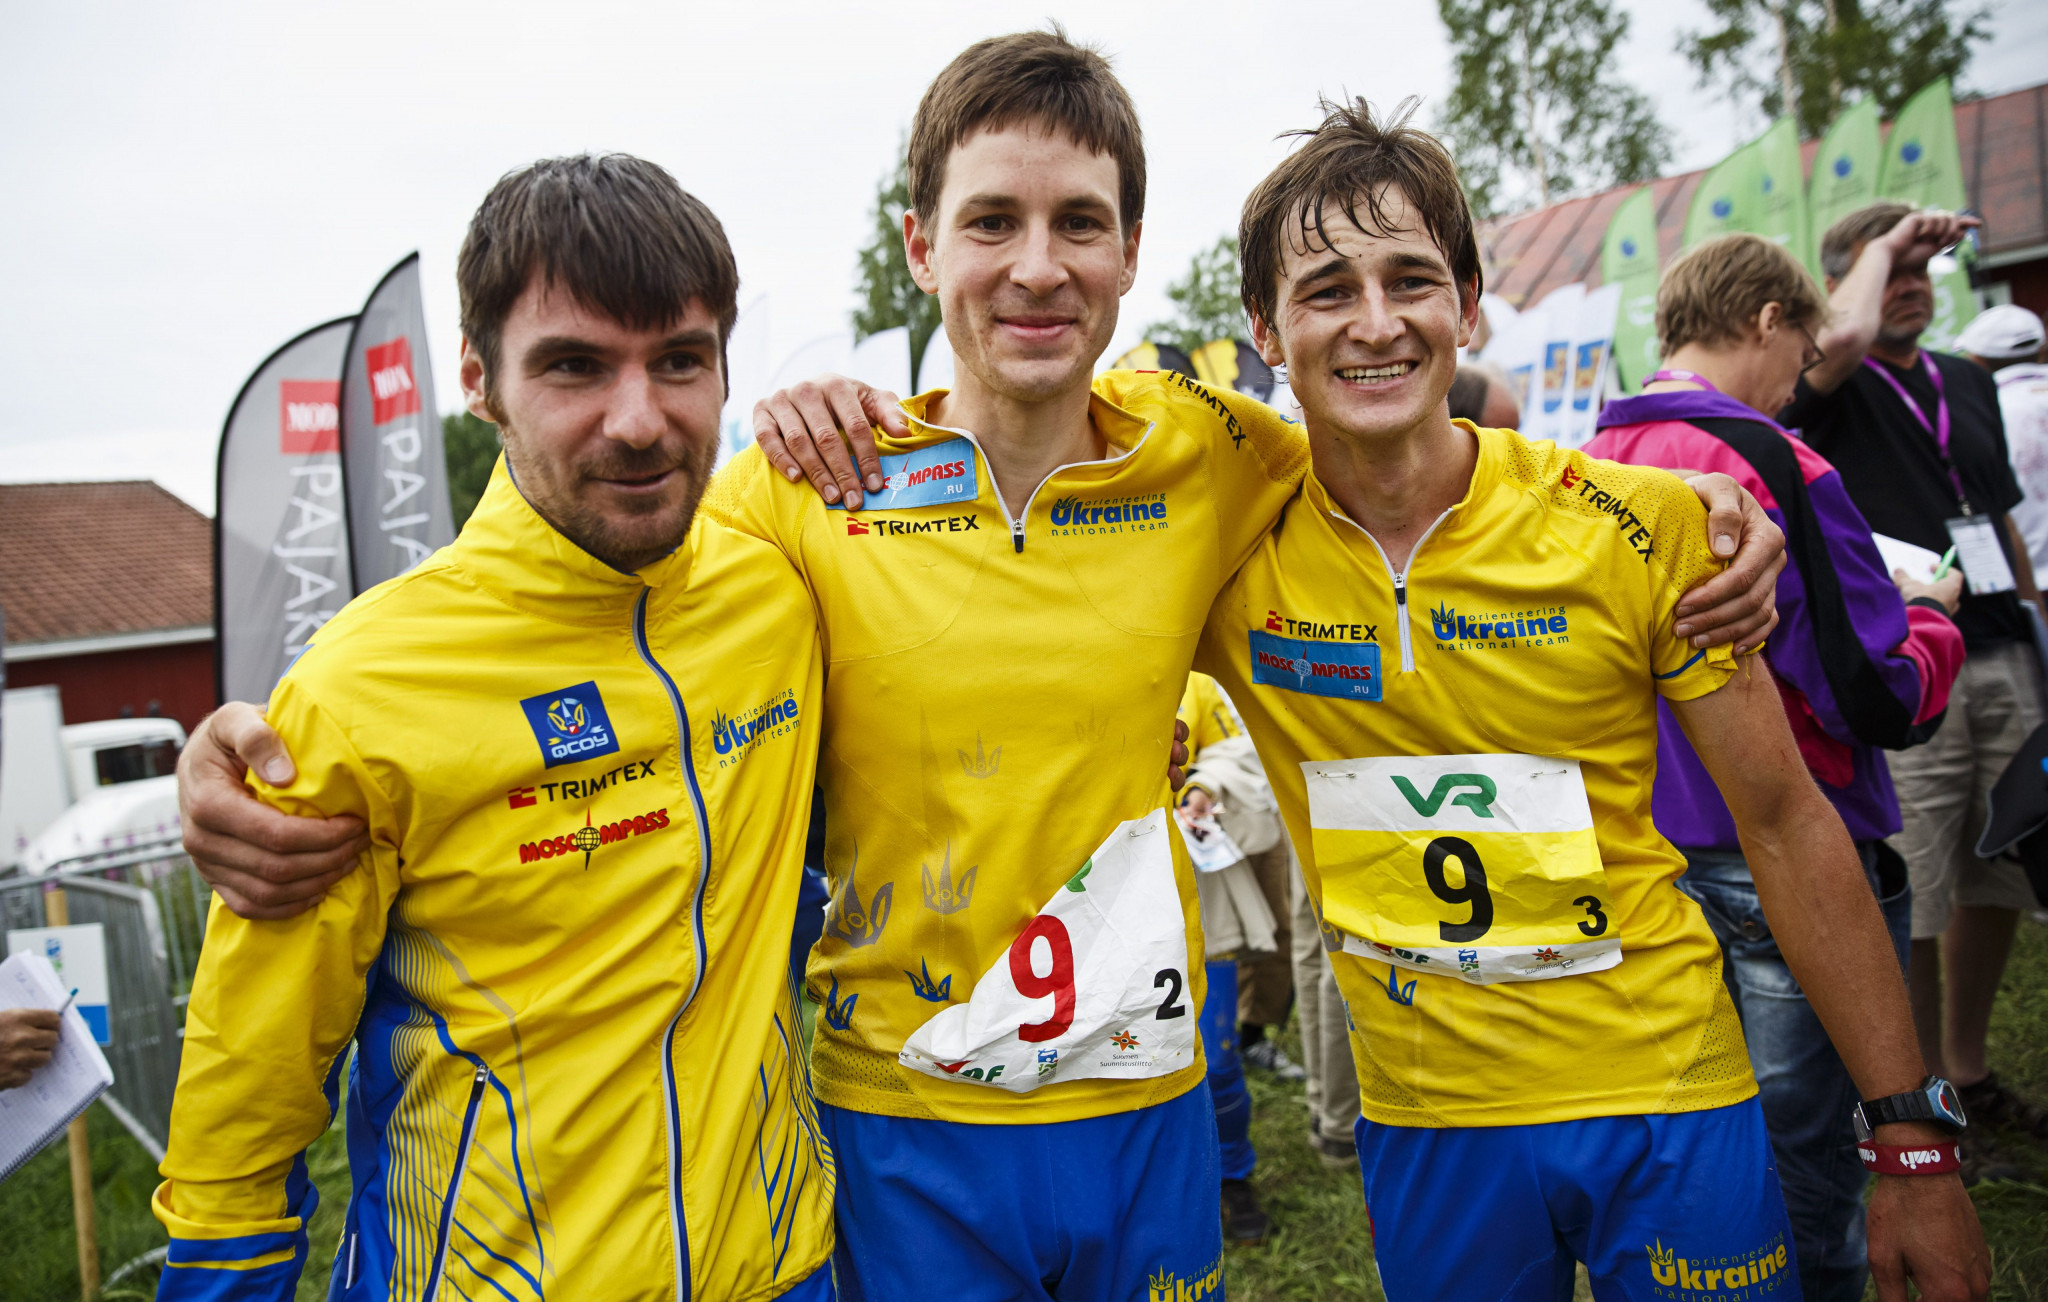 Ukraine have won eight medals at Orienteering World Championships ©Getty Images